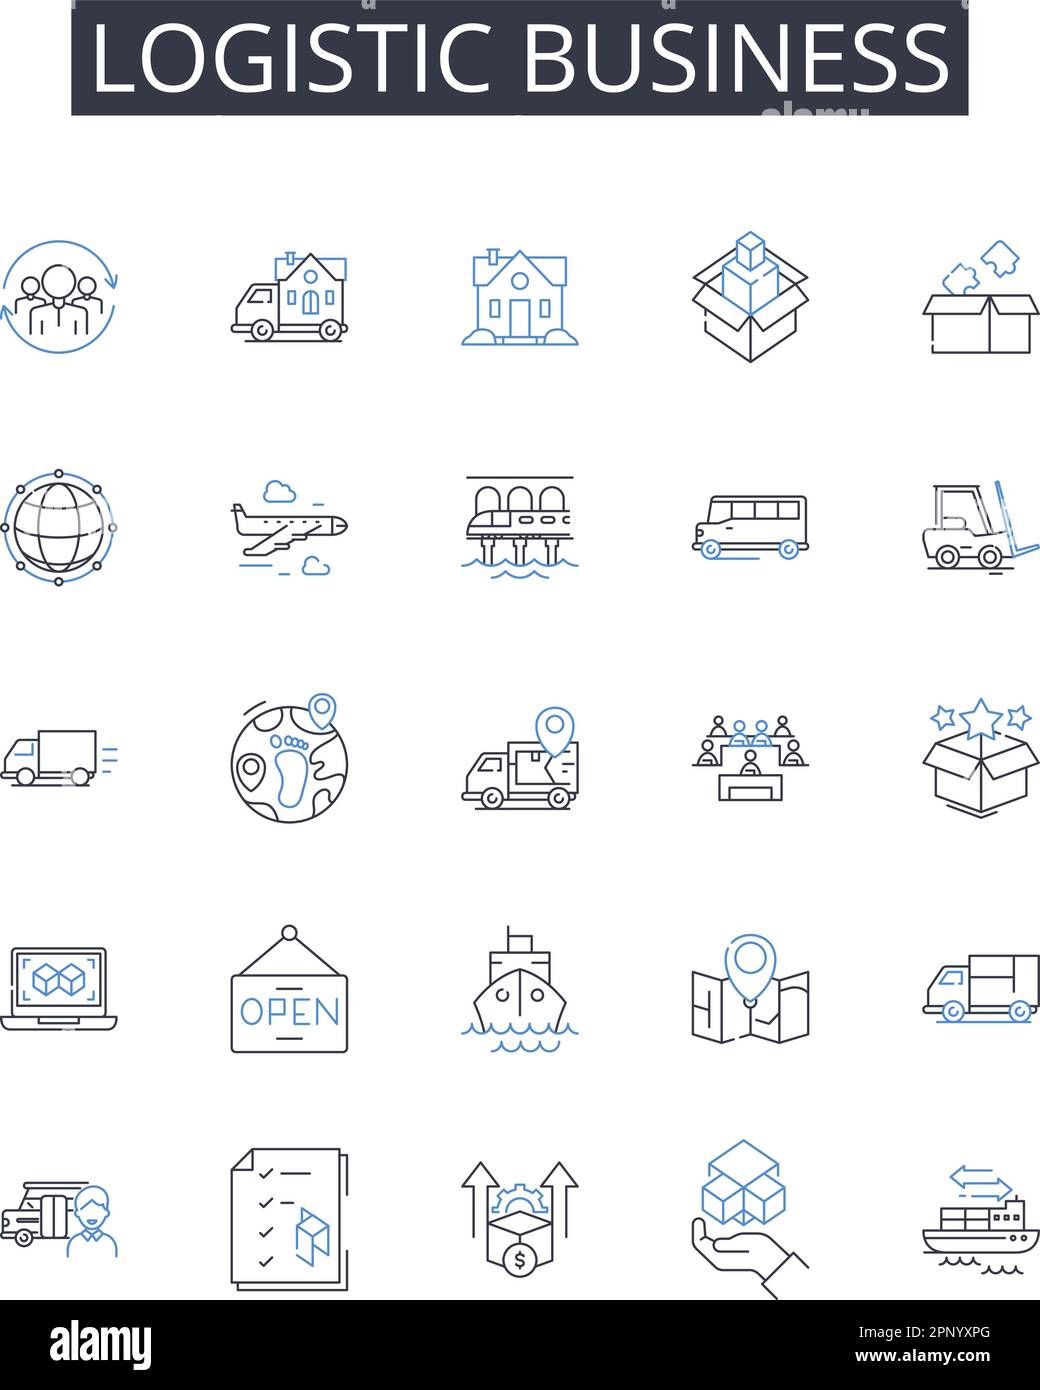 Logistic business line icons collection. Supply chain management, Distribution system, Transportation services, Fleet management, Warehousing Stock Vector